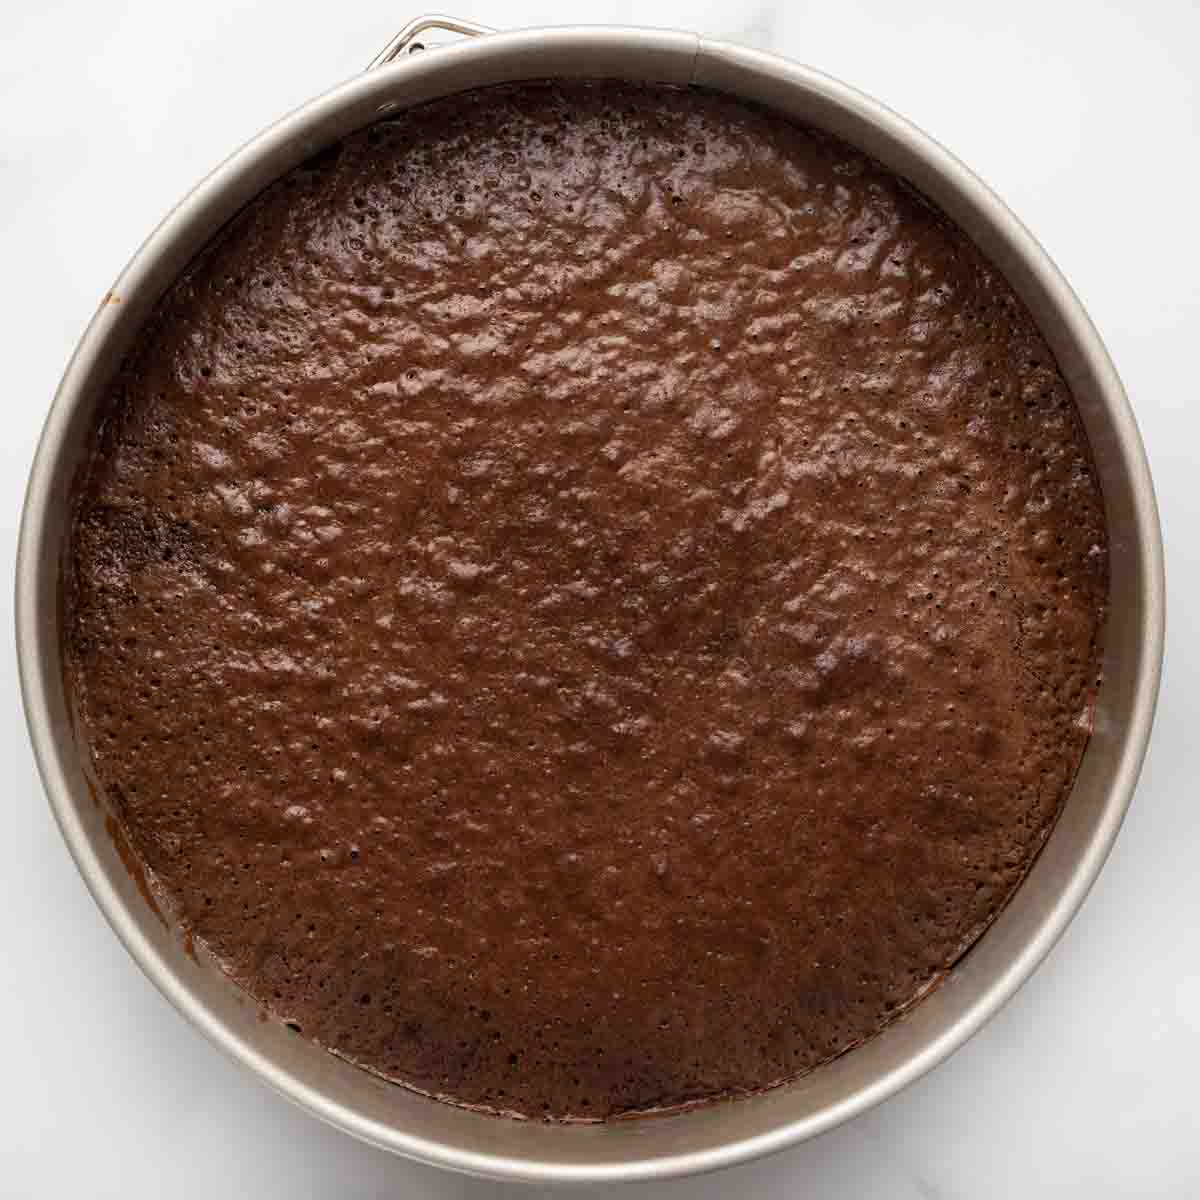 baked flourless chocolate cake in the pan